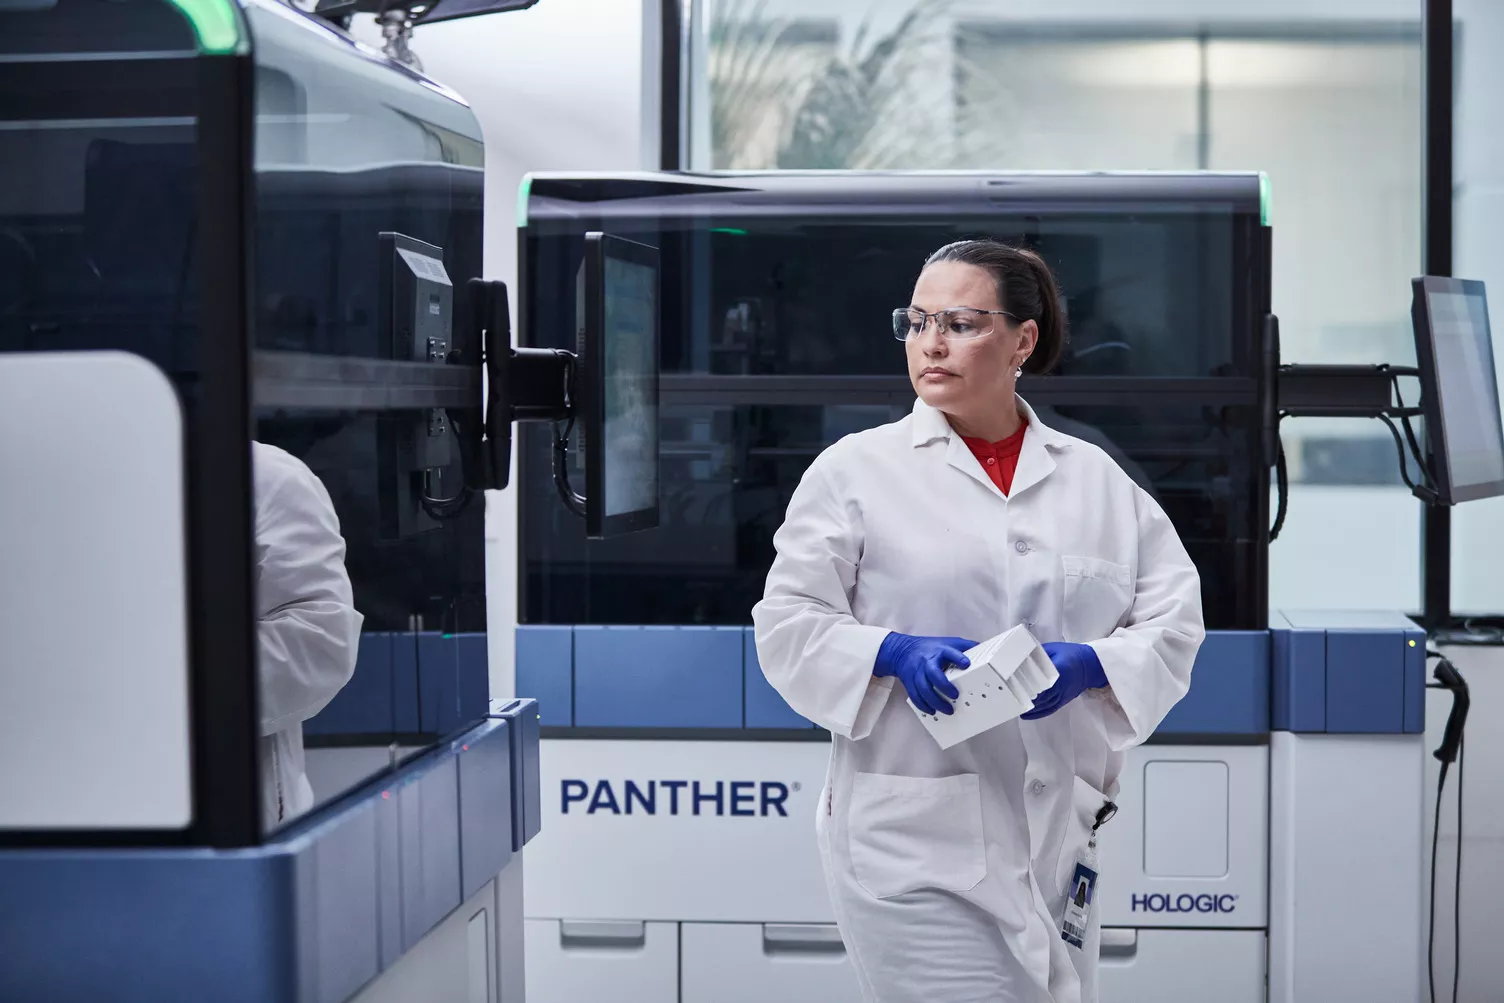 Technician walking in front of Panther Systems in a lab setting.